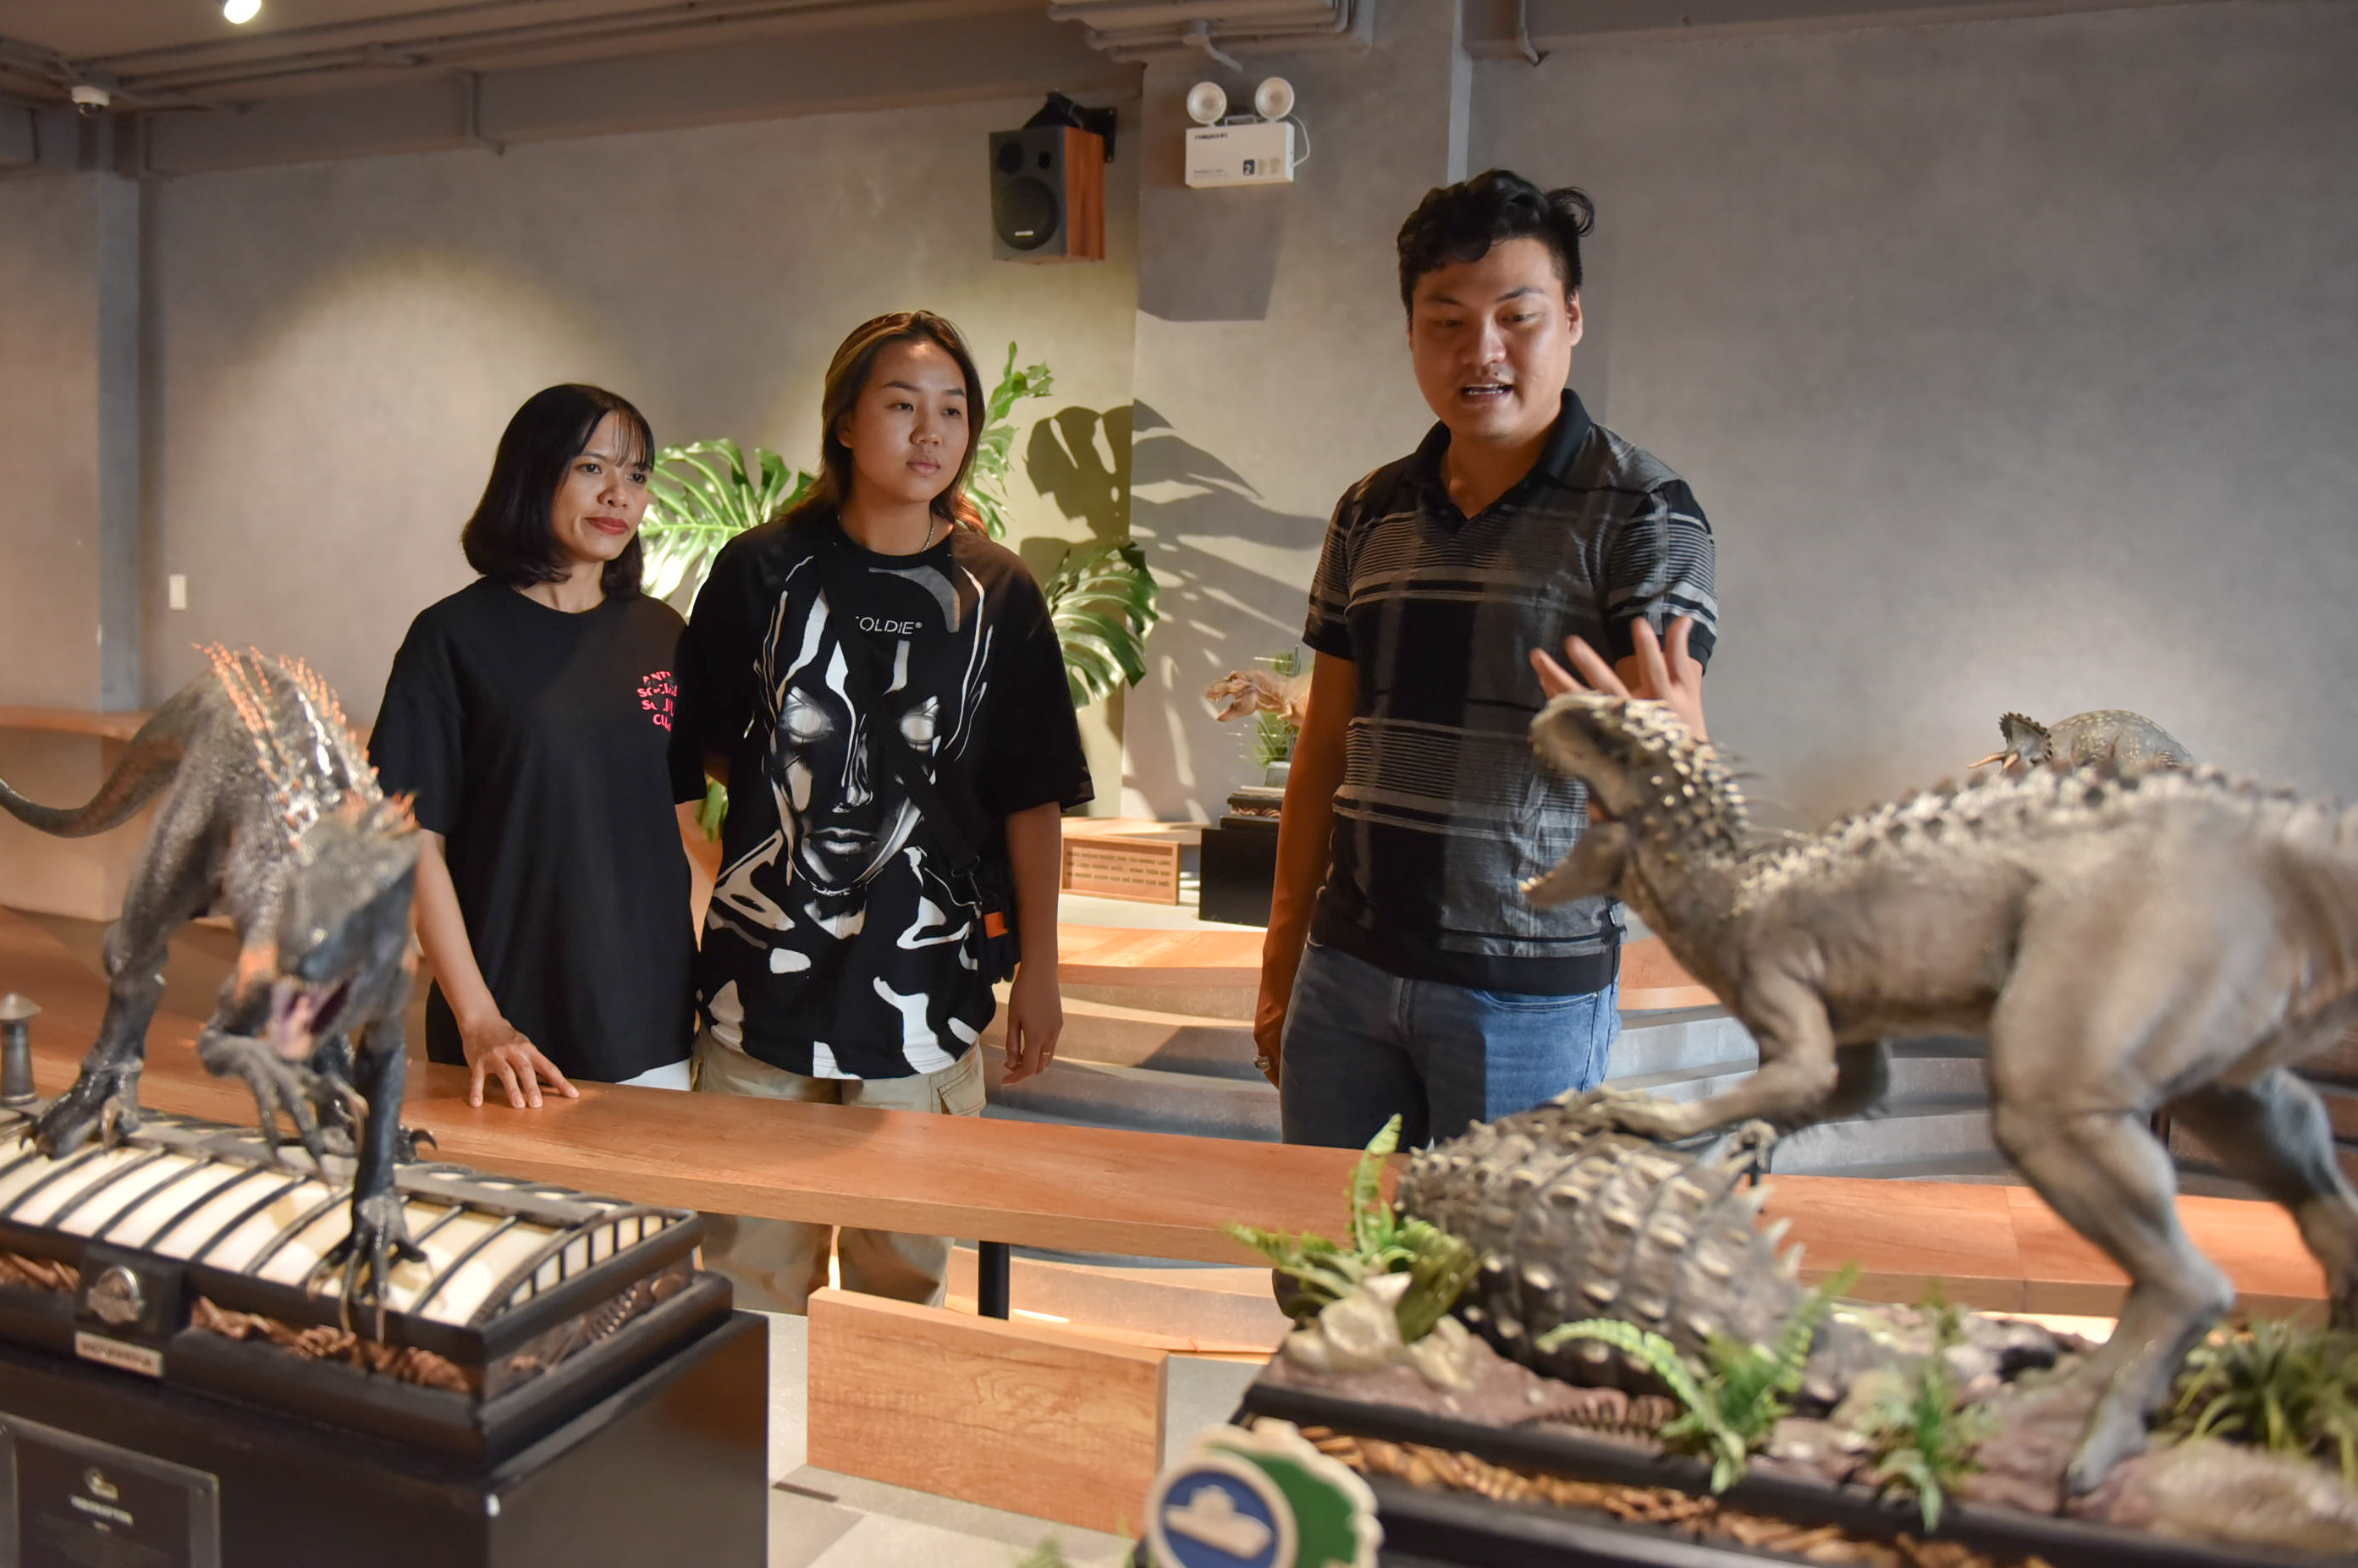 Owner Pham Cong Ly (right) discusses dinosaurs with a guest at SAURUS Coffee & Gallery in Go Vap District, Ho Chi Minh City. Photo: Ngoc Phuong / Tuoi Tre News